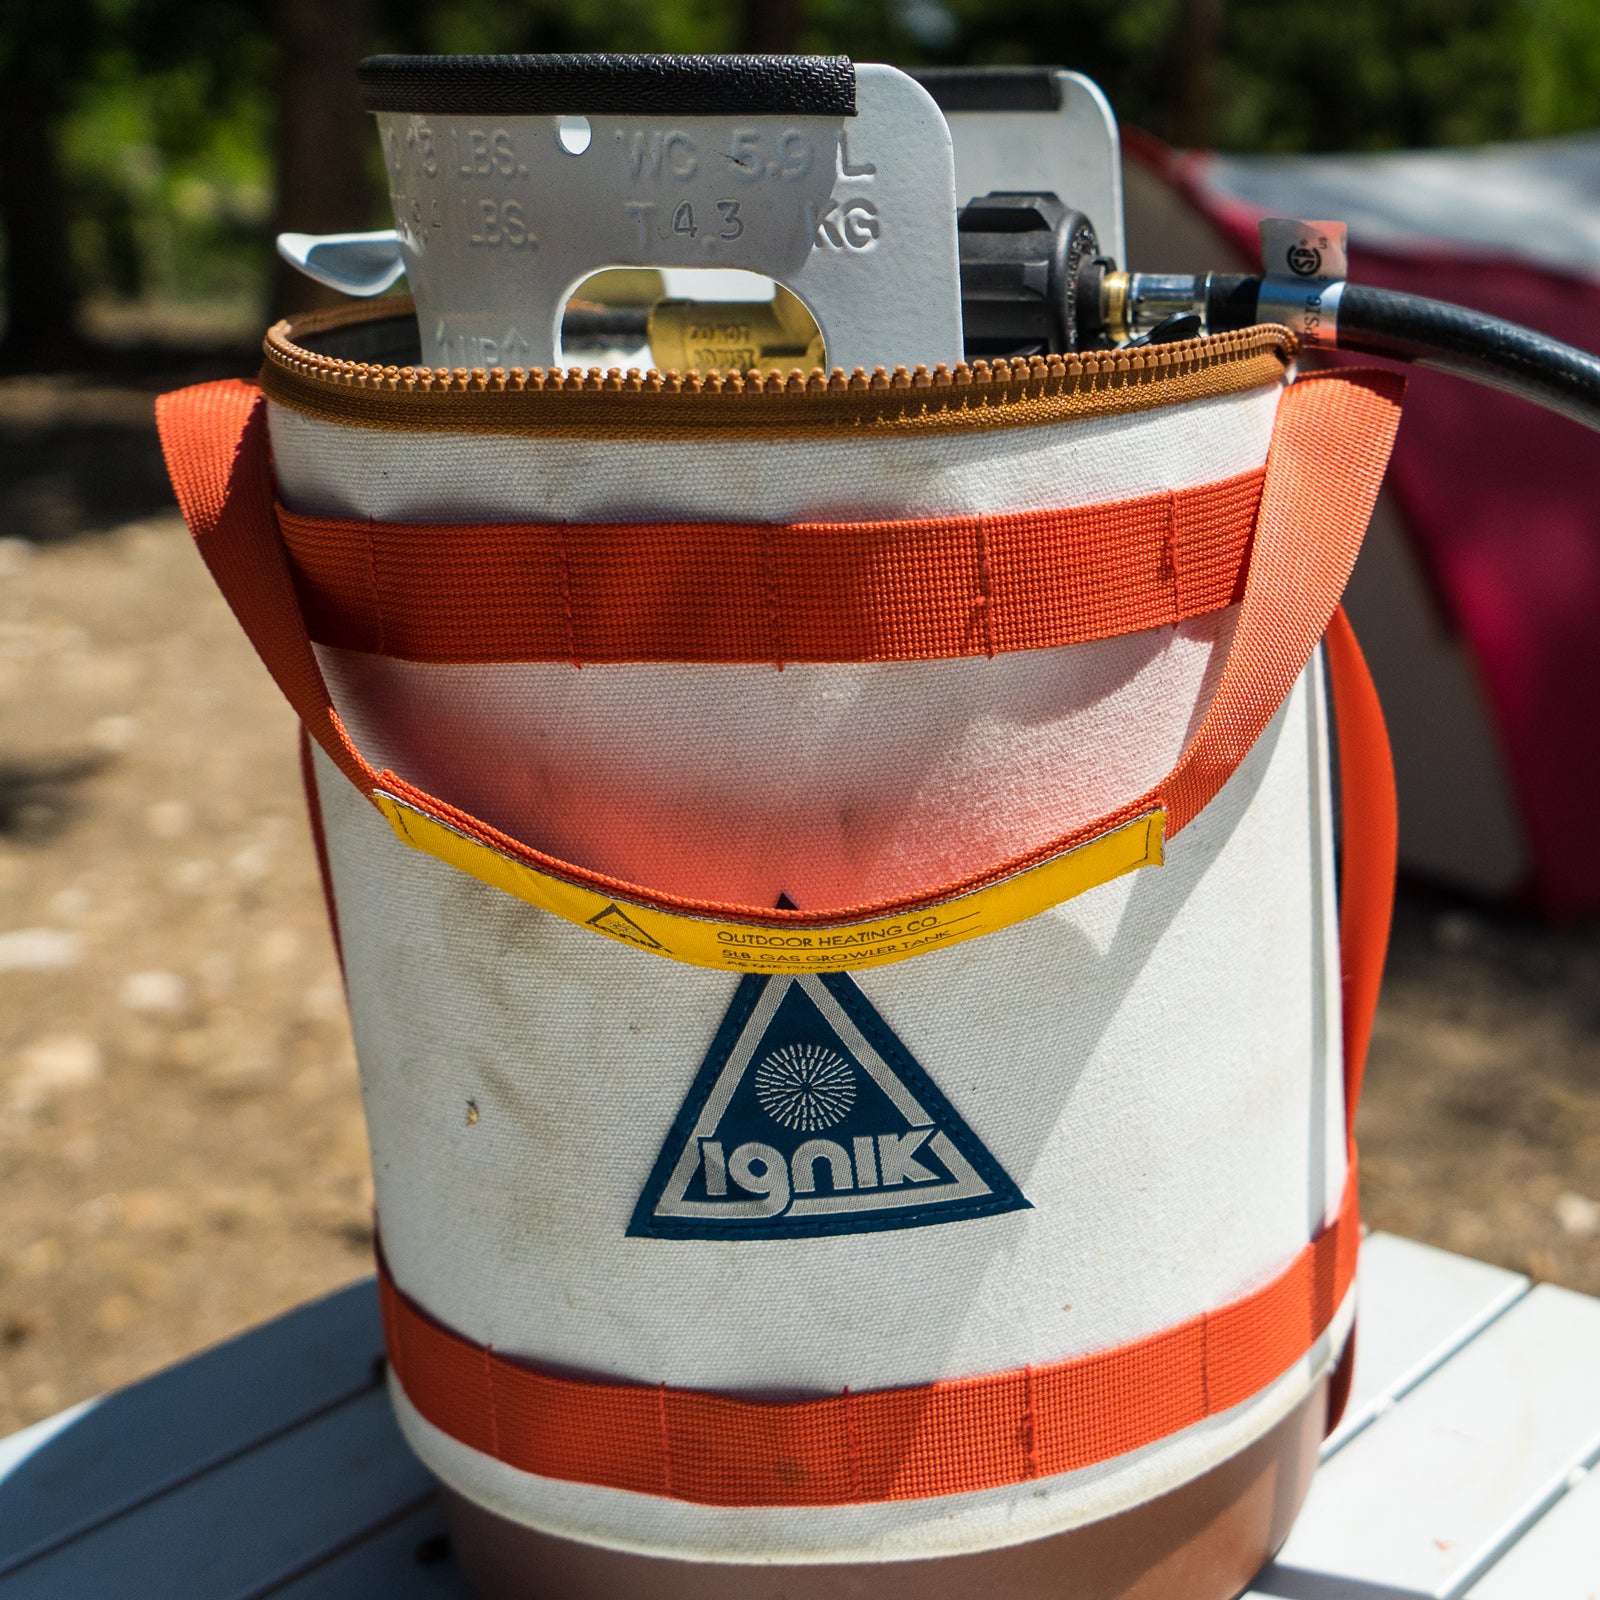 How to Refill and Recycle Propane Canisters for Camping